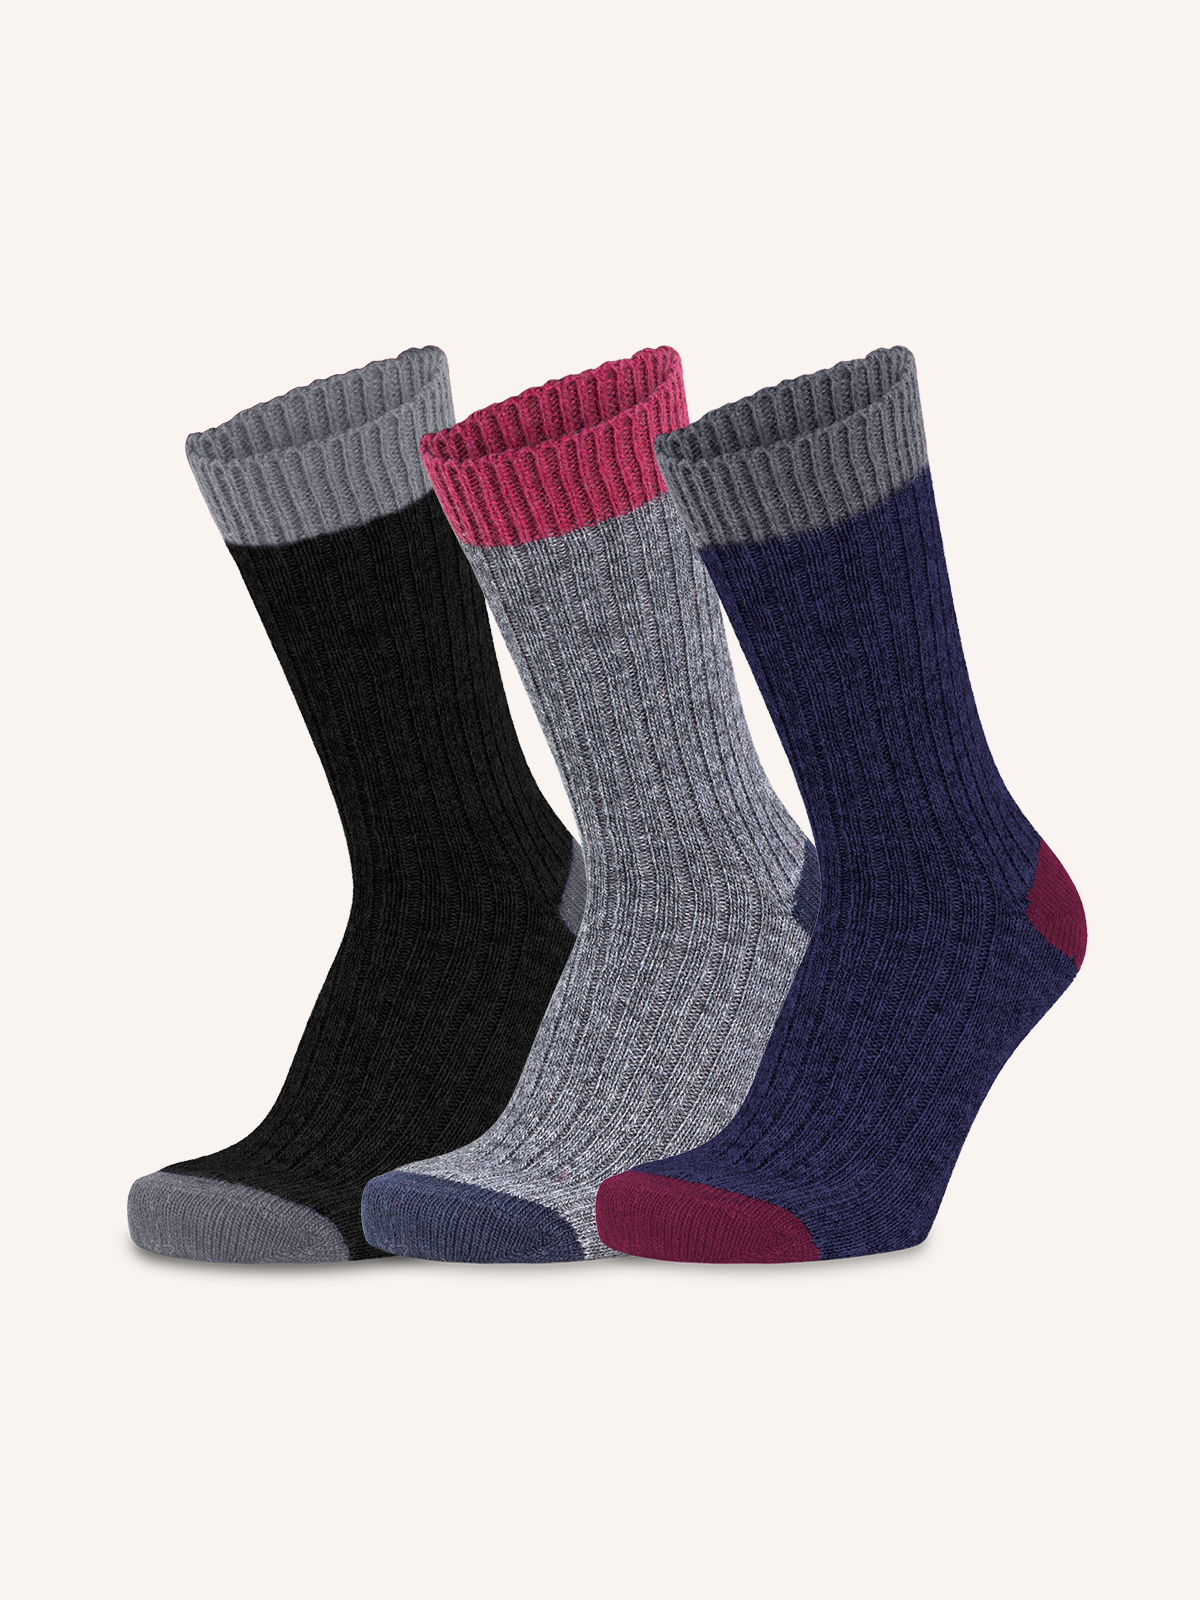 Short Ribbed Socks in Cashmere and Wool Blend for Women | Plain Color | Pack of 3 pairs | Cachelife DC